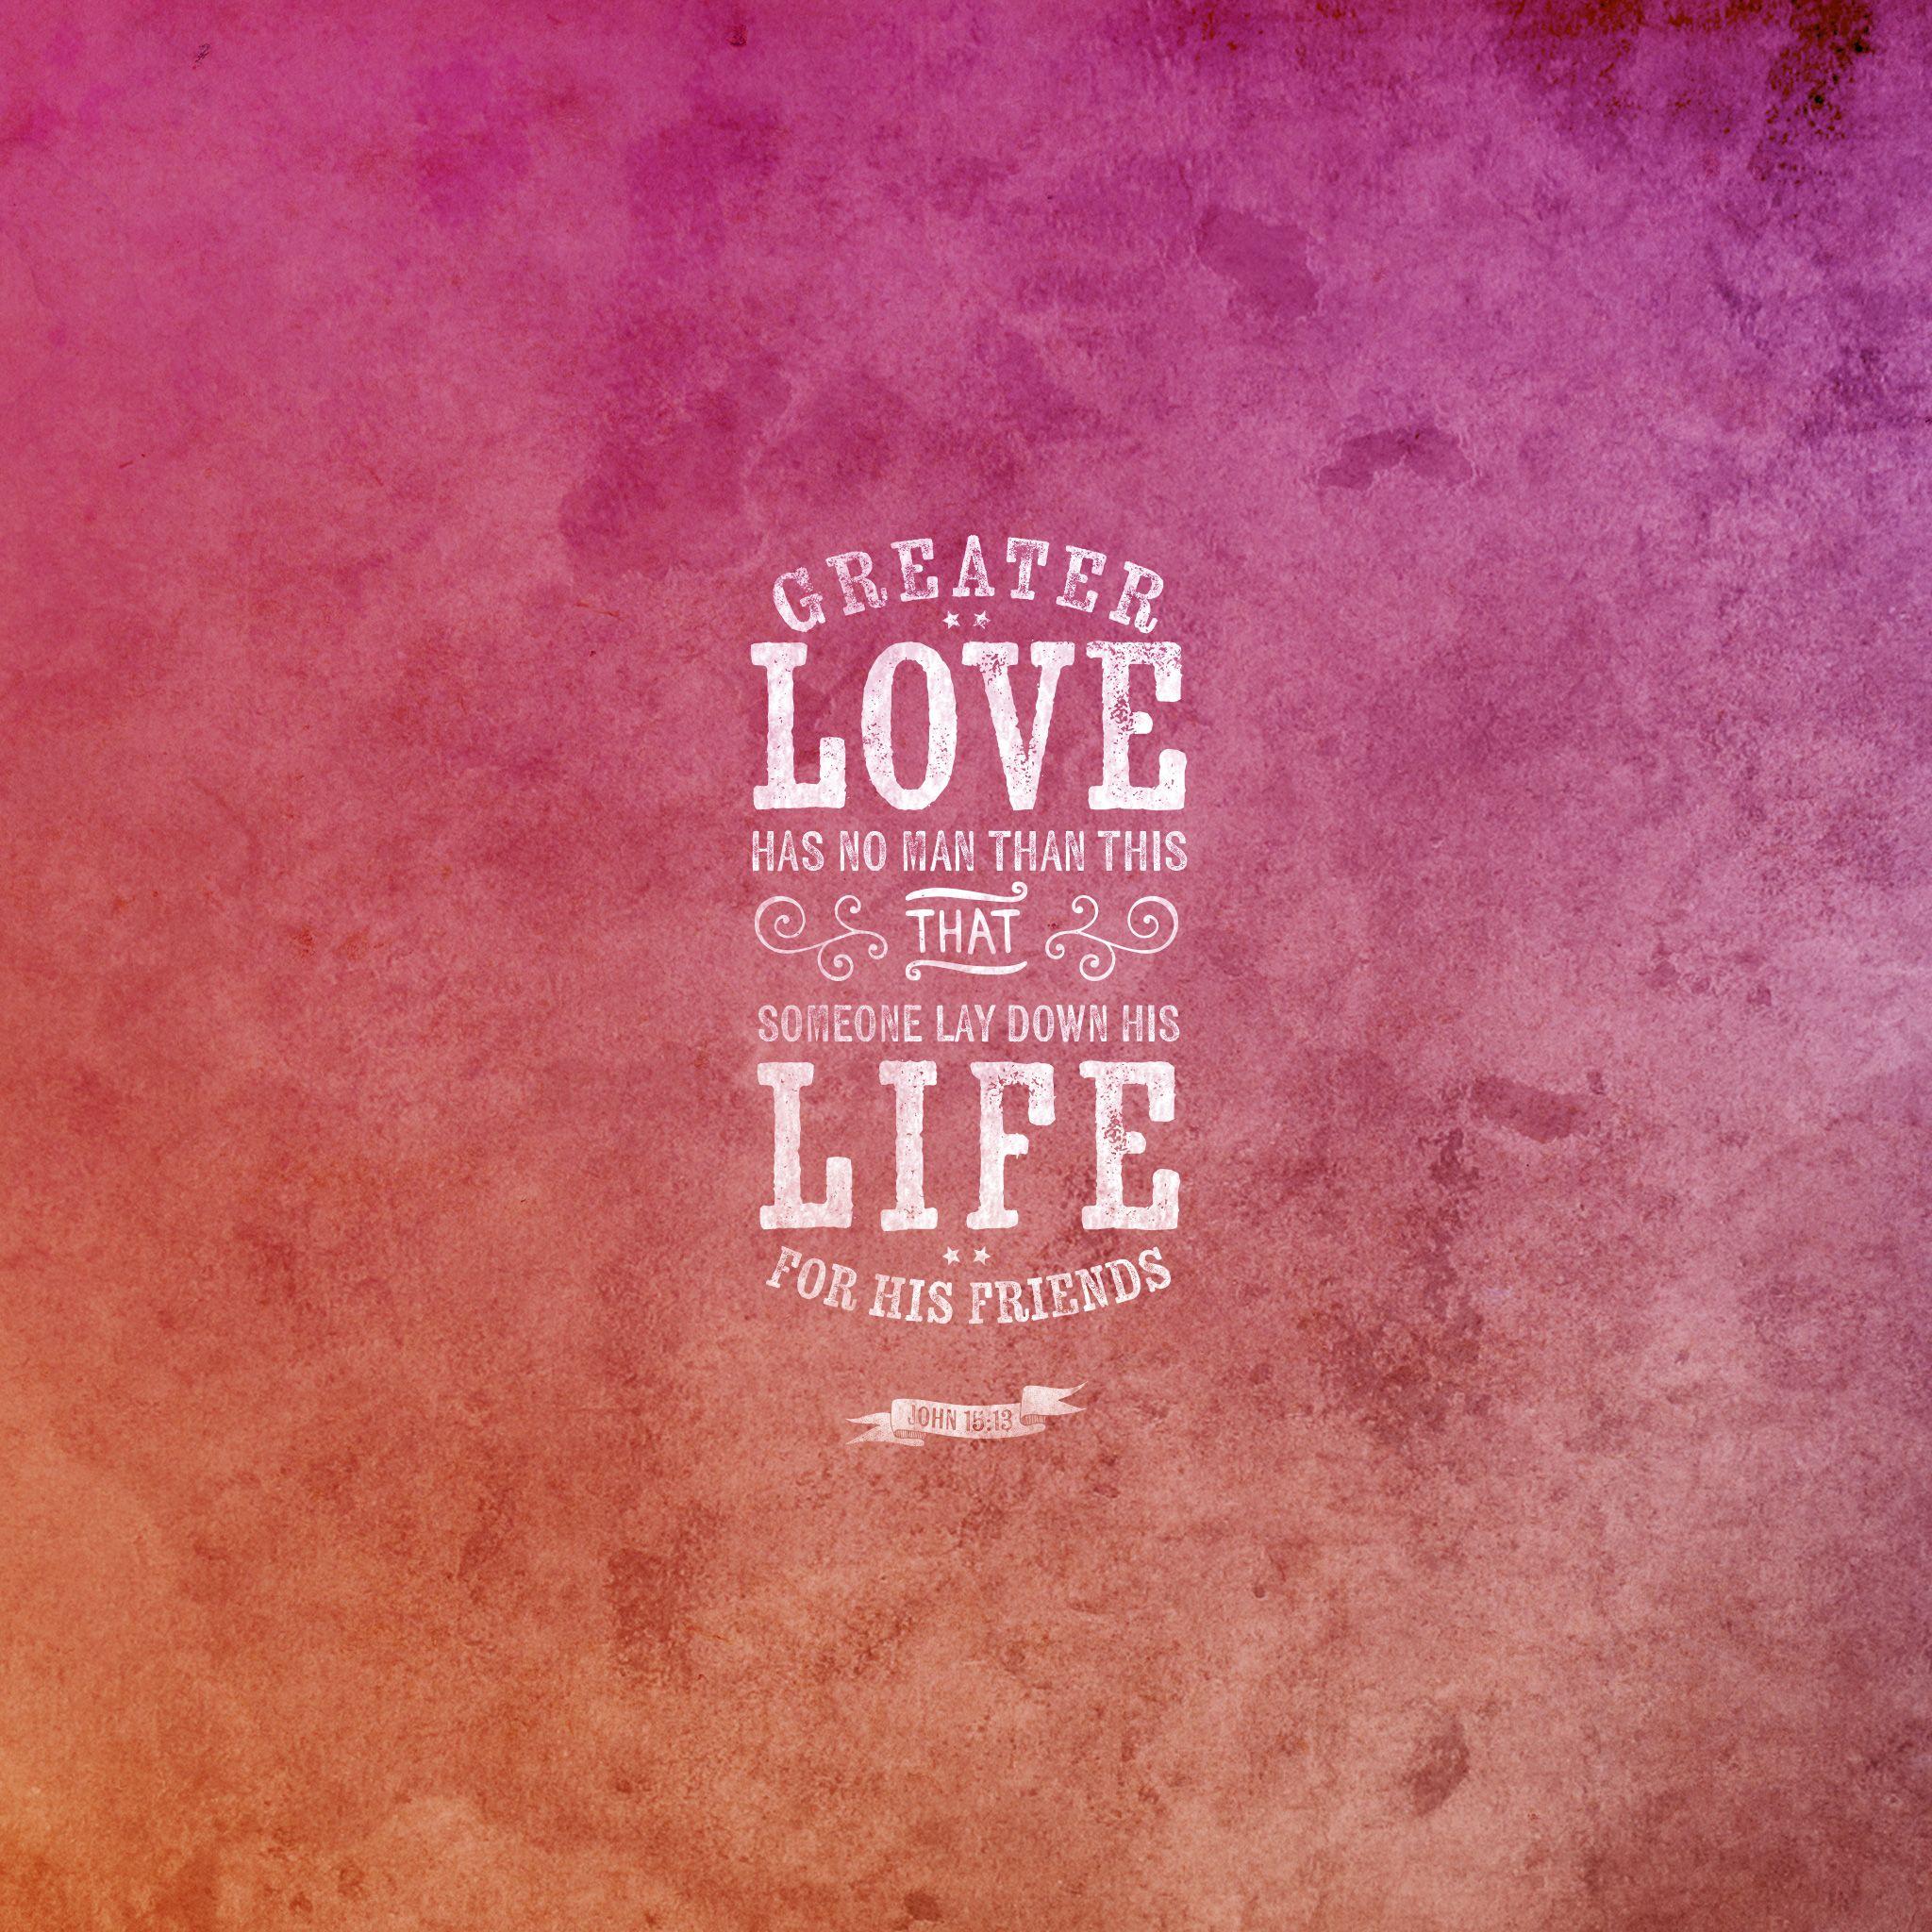 Wednesday Wallpaper: No Greater Love